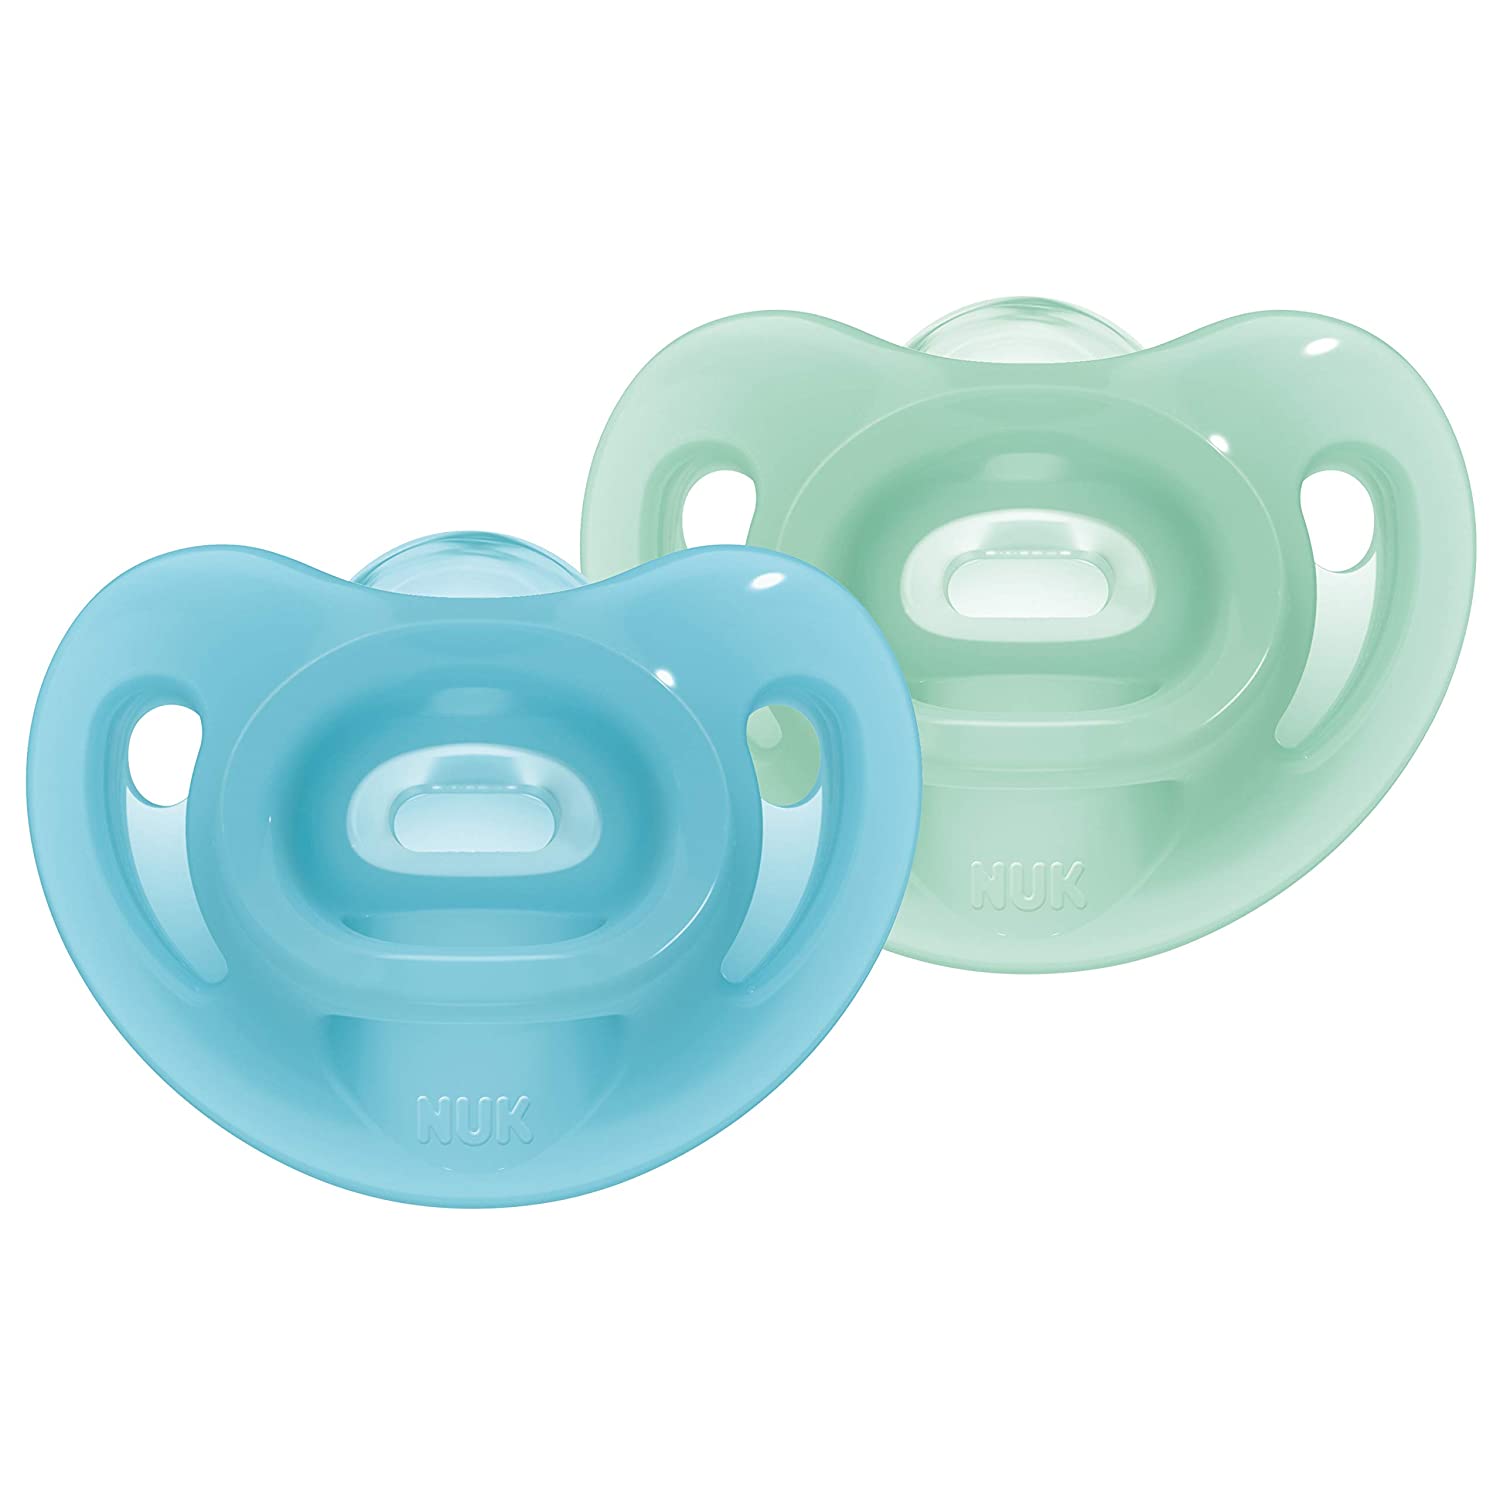 NUK Sensitive Dummy, 6-18 Months, 100% Silicone for Delicate Skin, BPA-Free, Blue & Green, Pack of 2